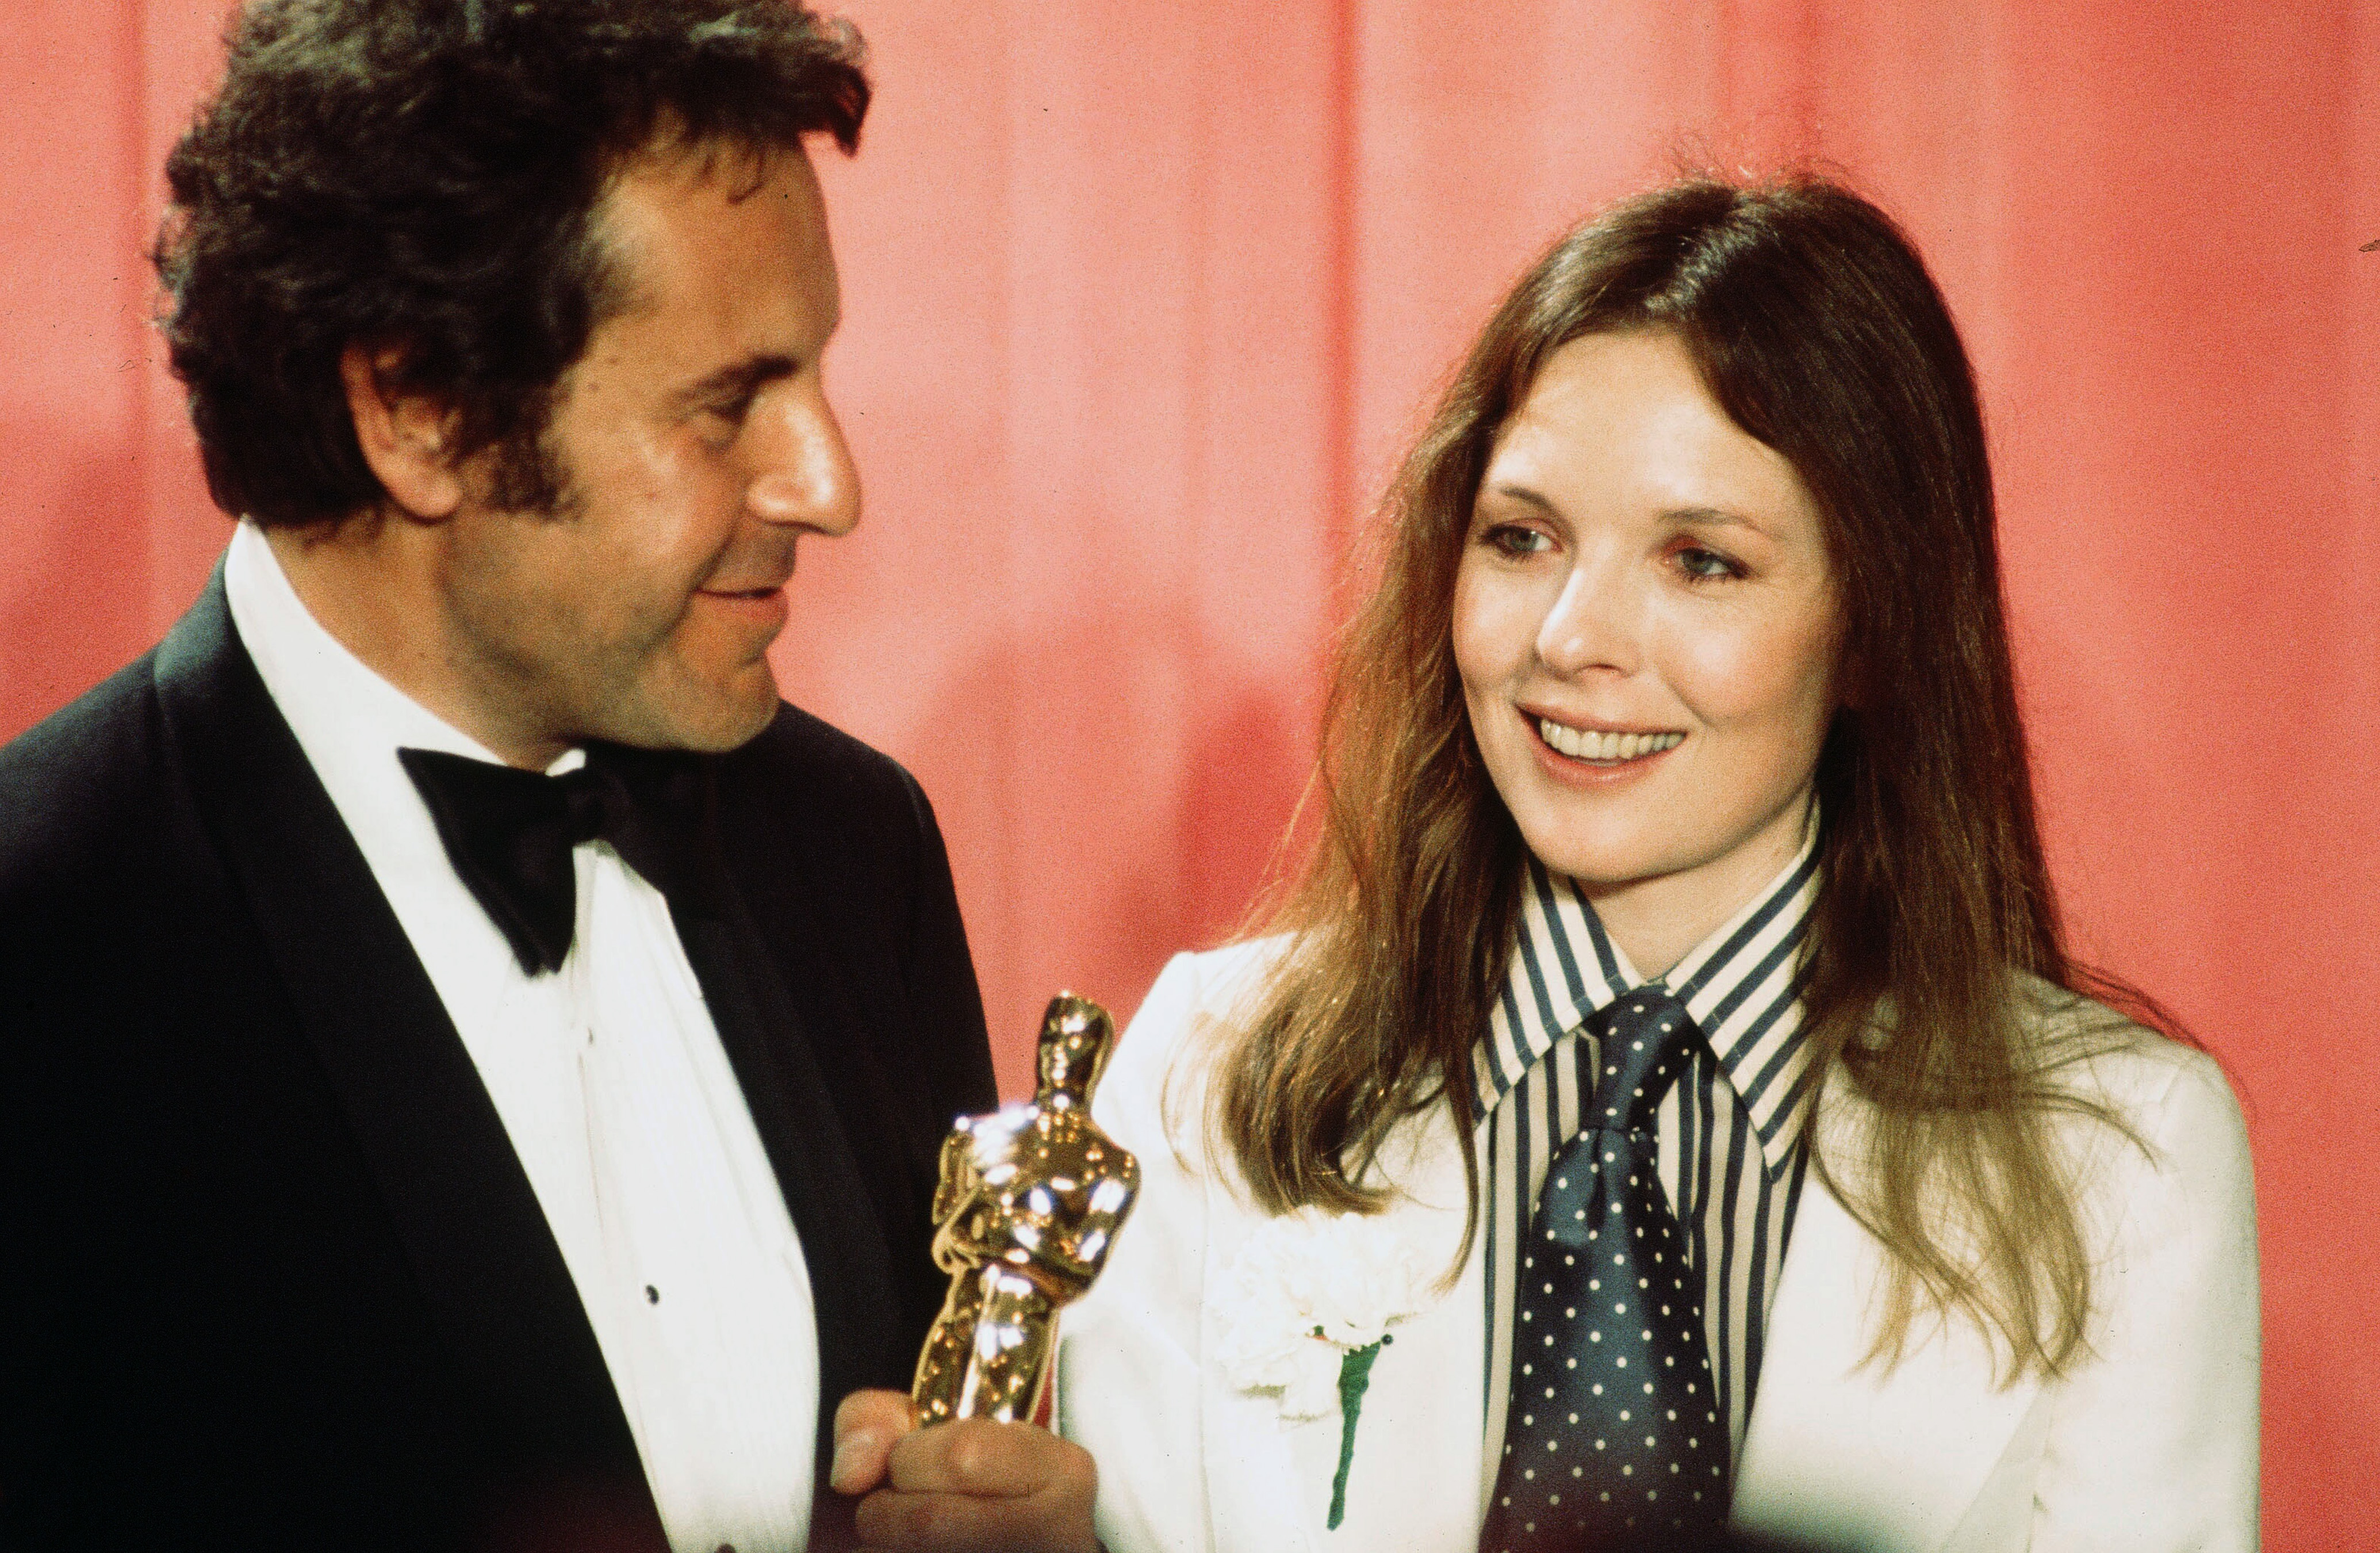 Milos Forman and Diane Keaton backstage after winning an award at the 48th Academy Awards in Los Angeles, 1976 | Source: Getty Images